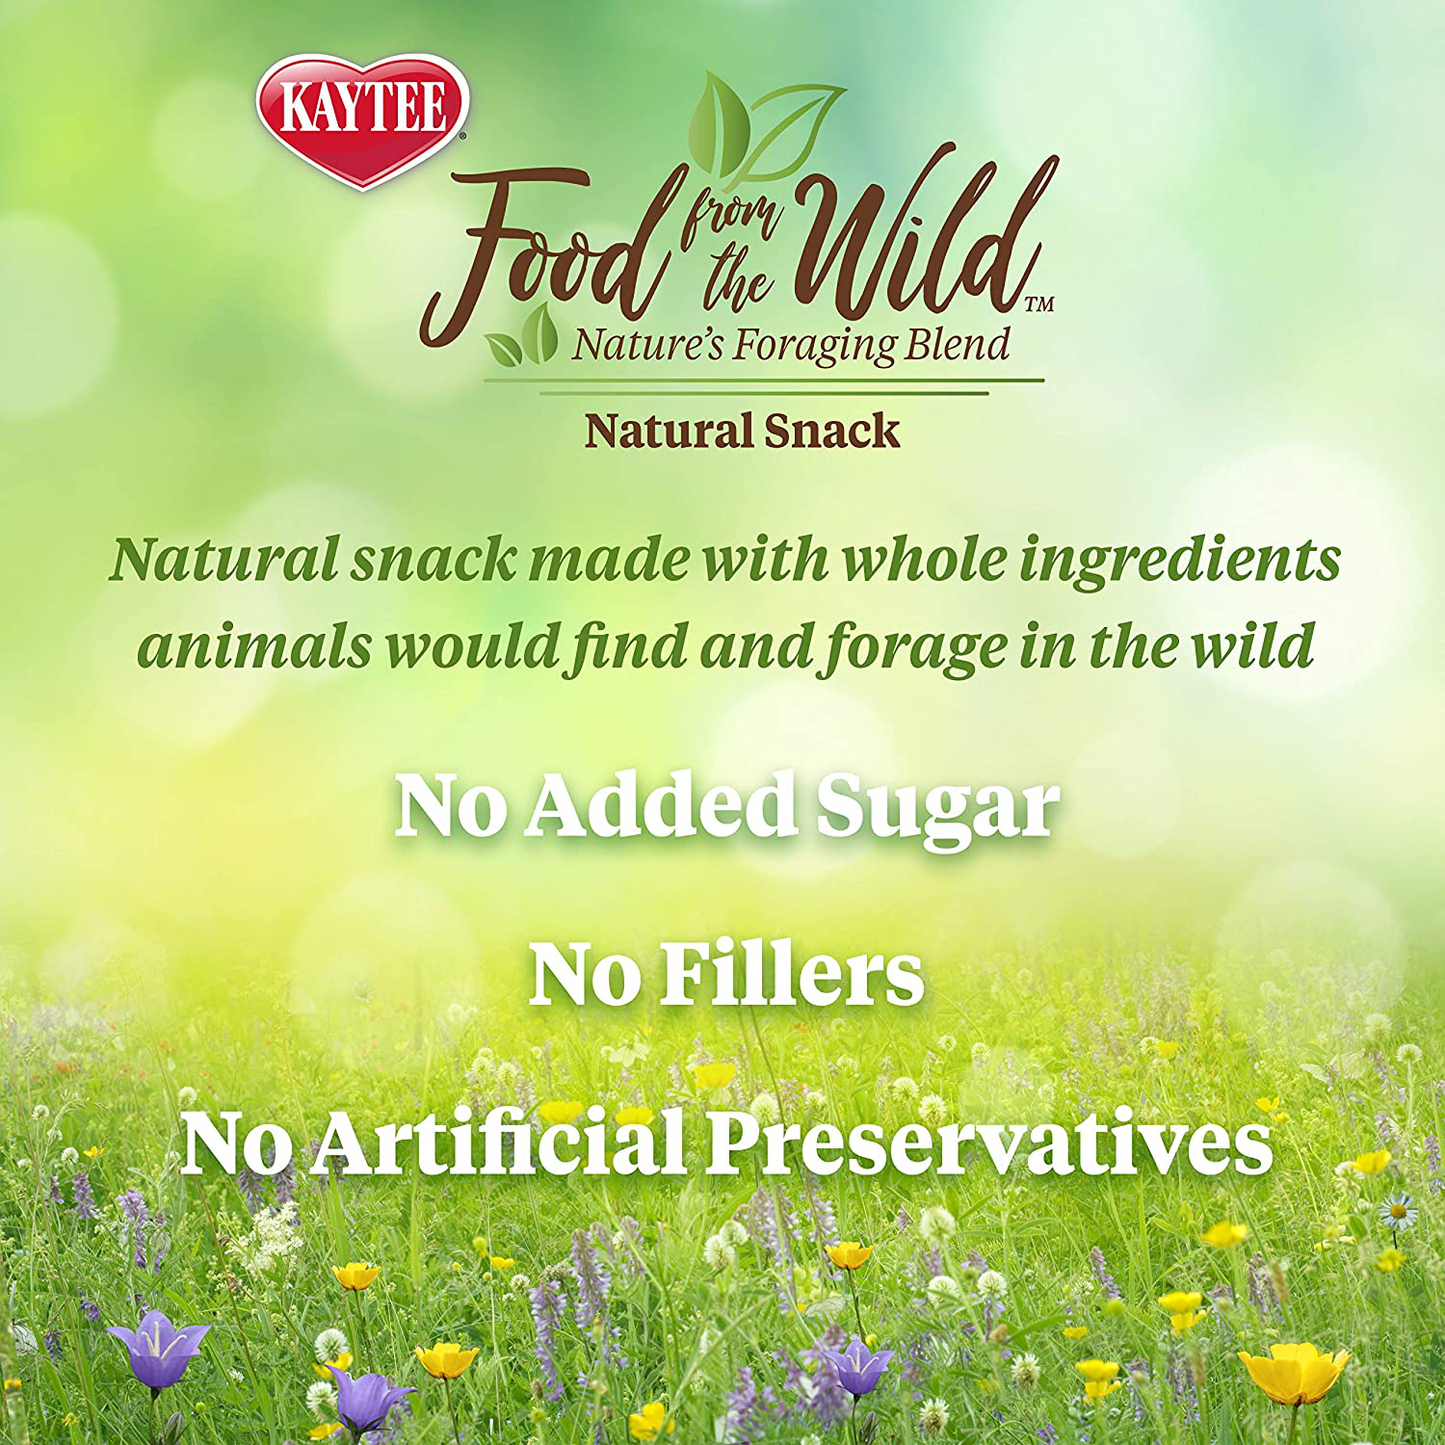 Kaytee Food from the Wild Natural Snack